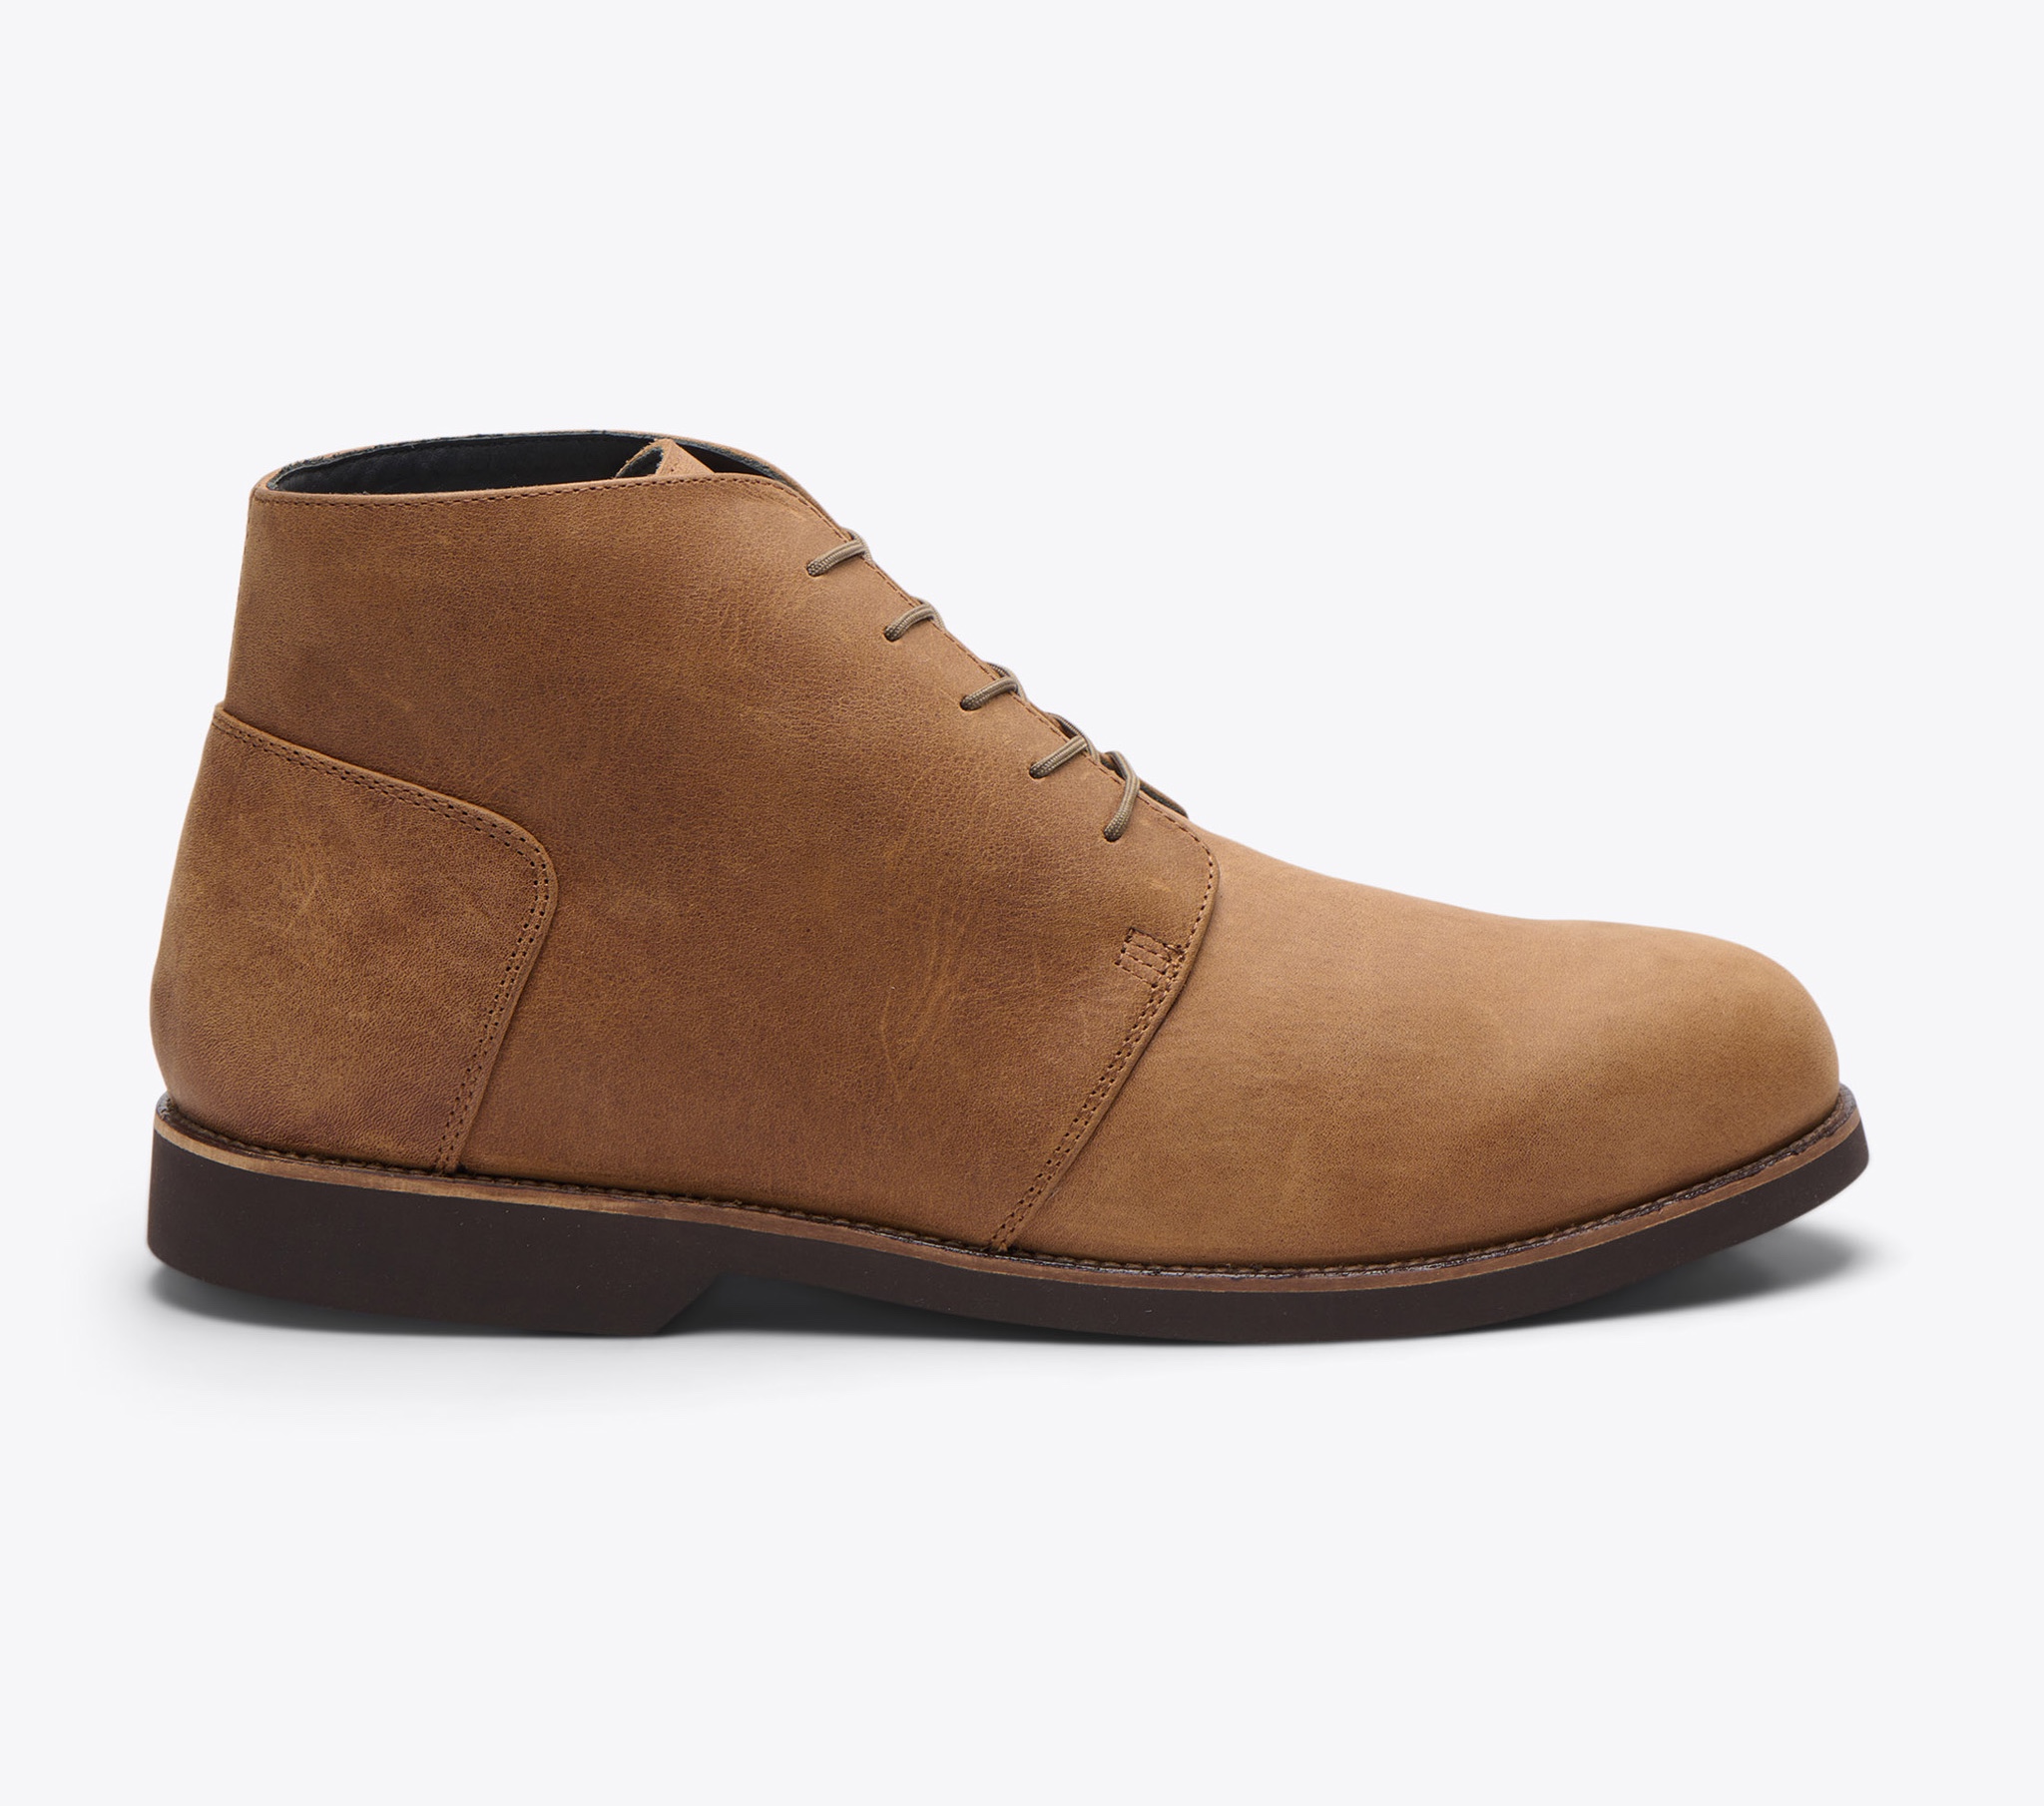 Nisolo Daytripper Chukka Boot Tobacco - Every Nisolo product is built on the foundation of comfort, function, and design. 